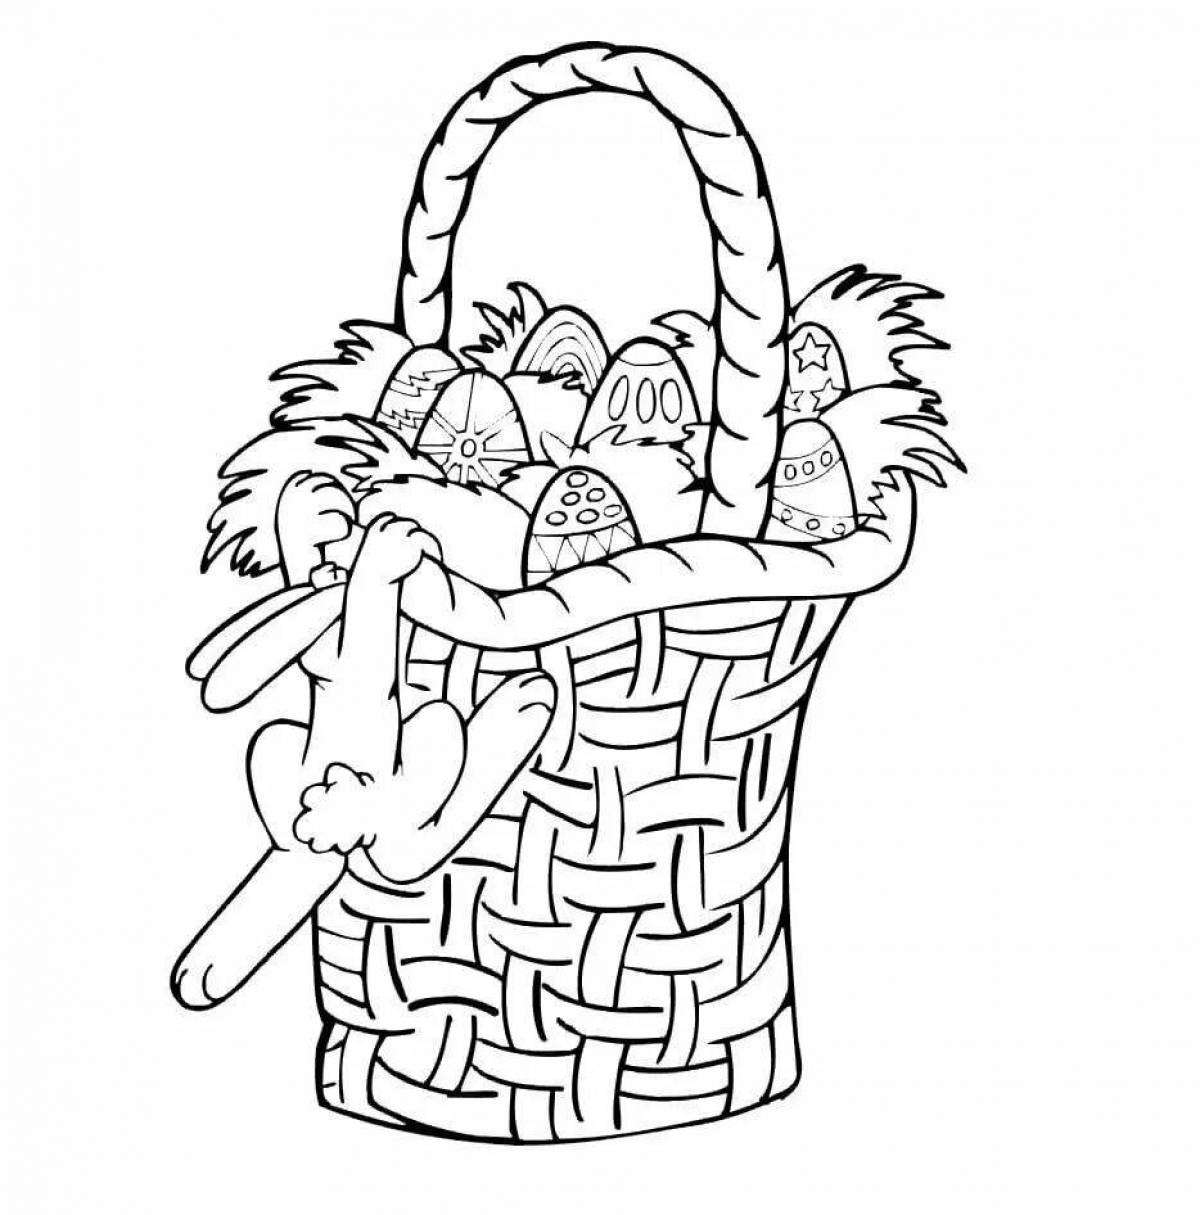 Coloring page funny basket with mushrooms